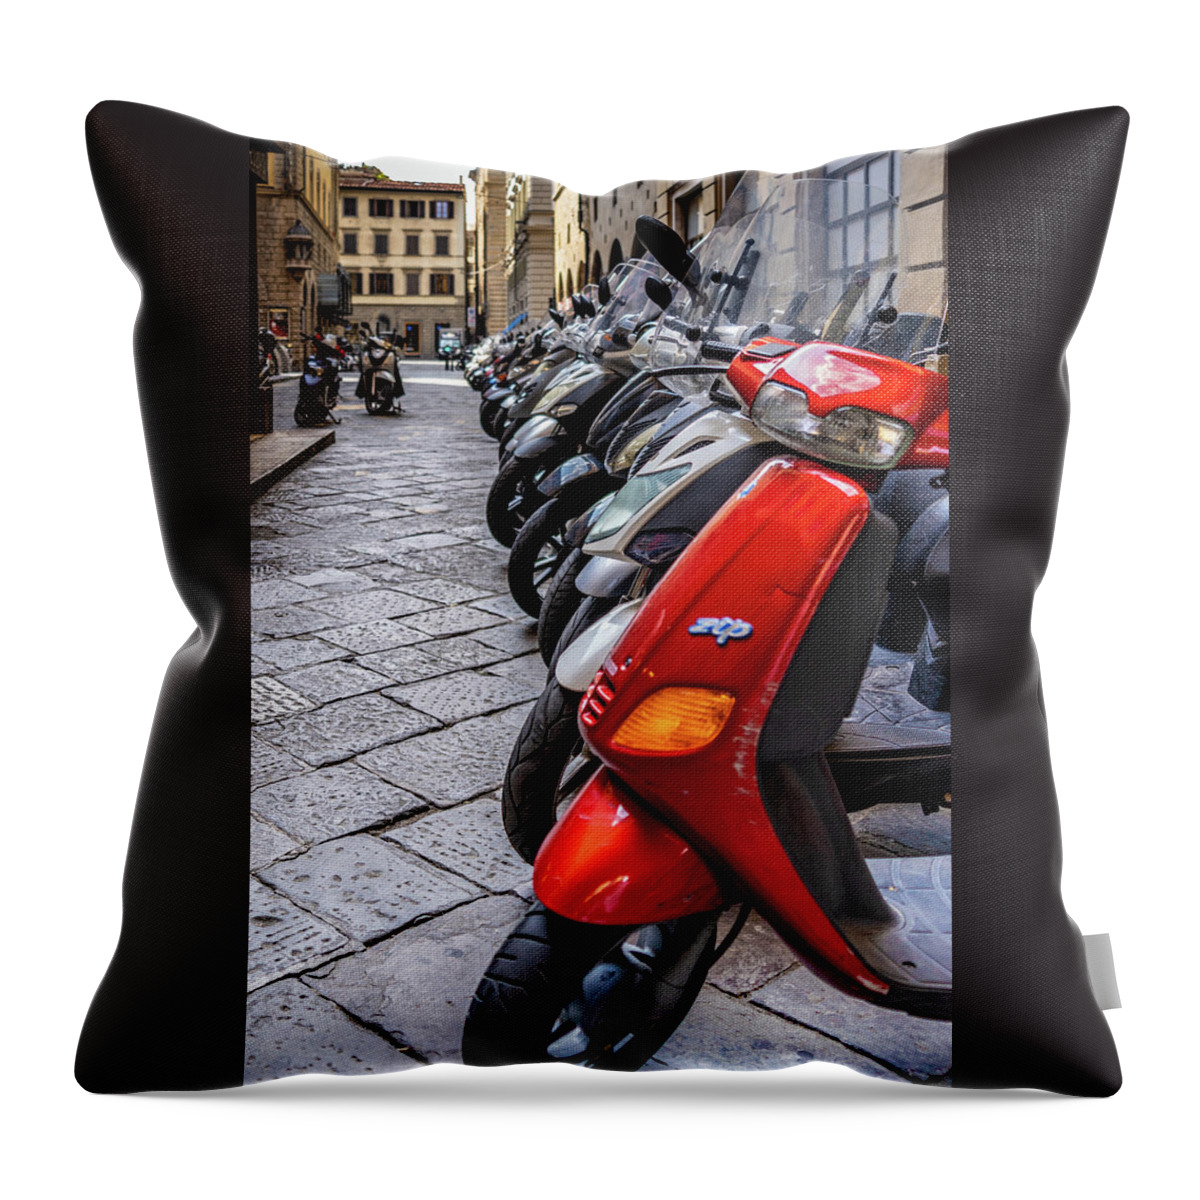 Tuscany Throw Pillow featuring the photograph Vroom by Marian Tagliarino